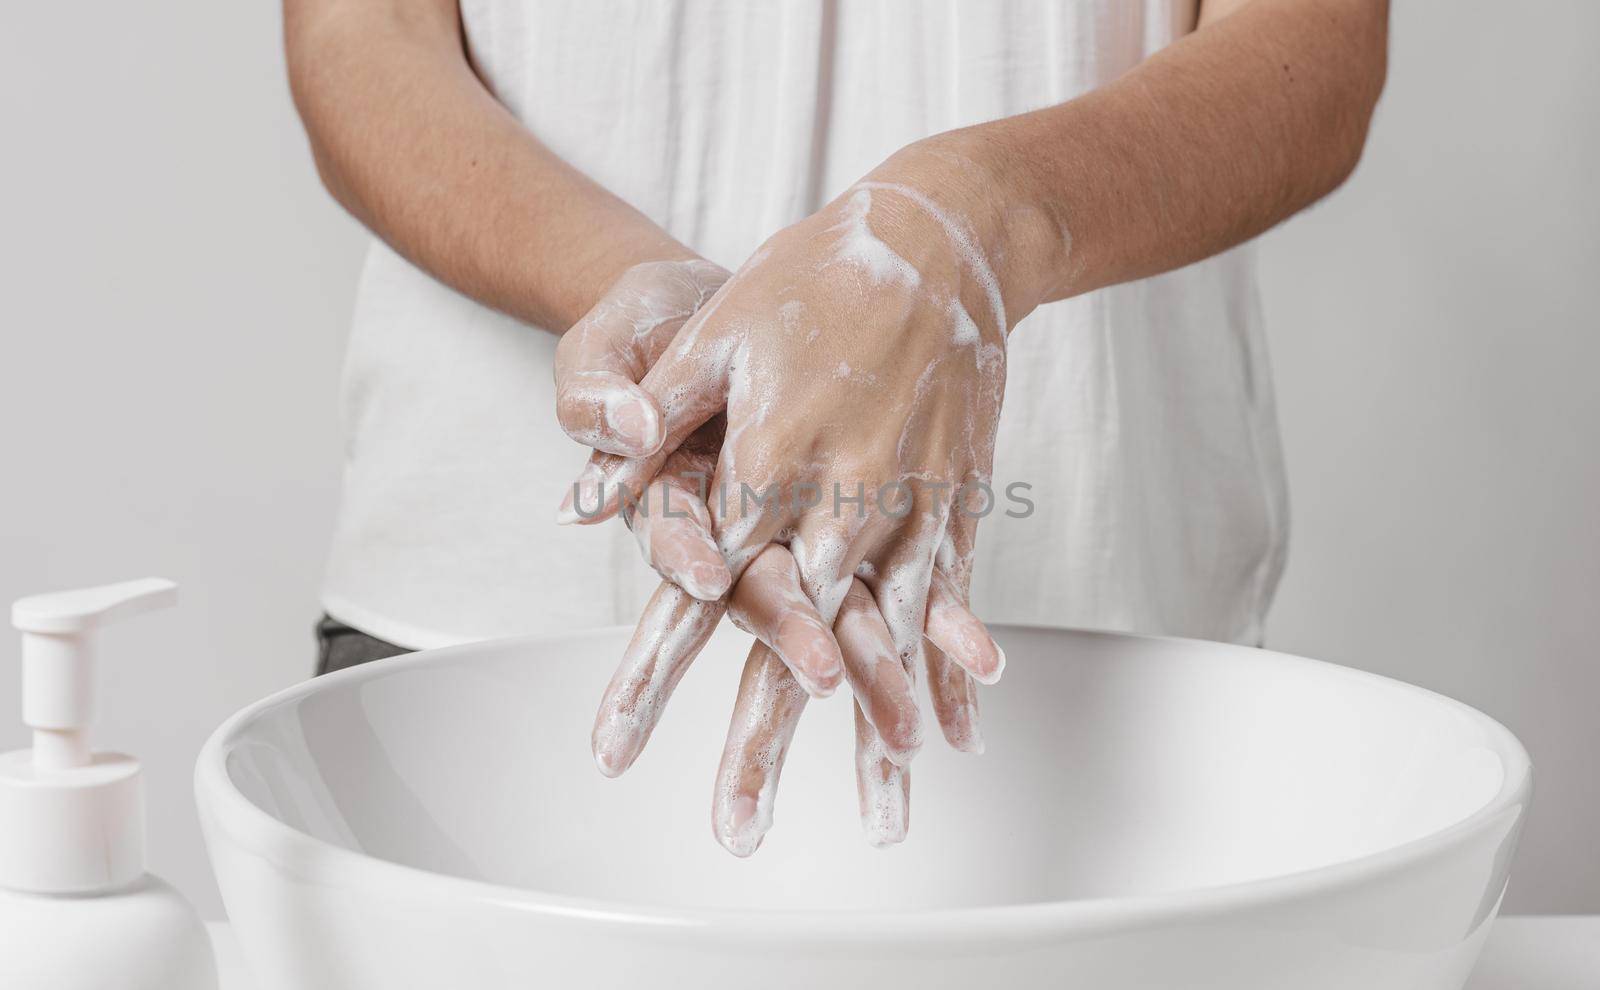 deep cleaning hands with water soap. High quality beautiful photo concept by Zahard